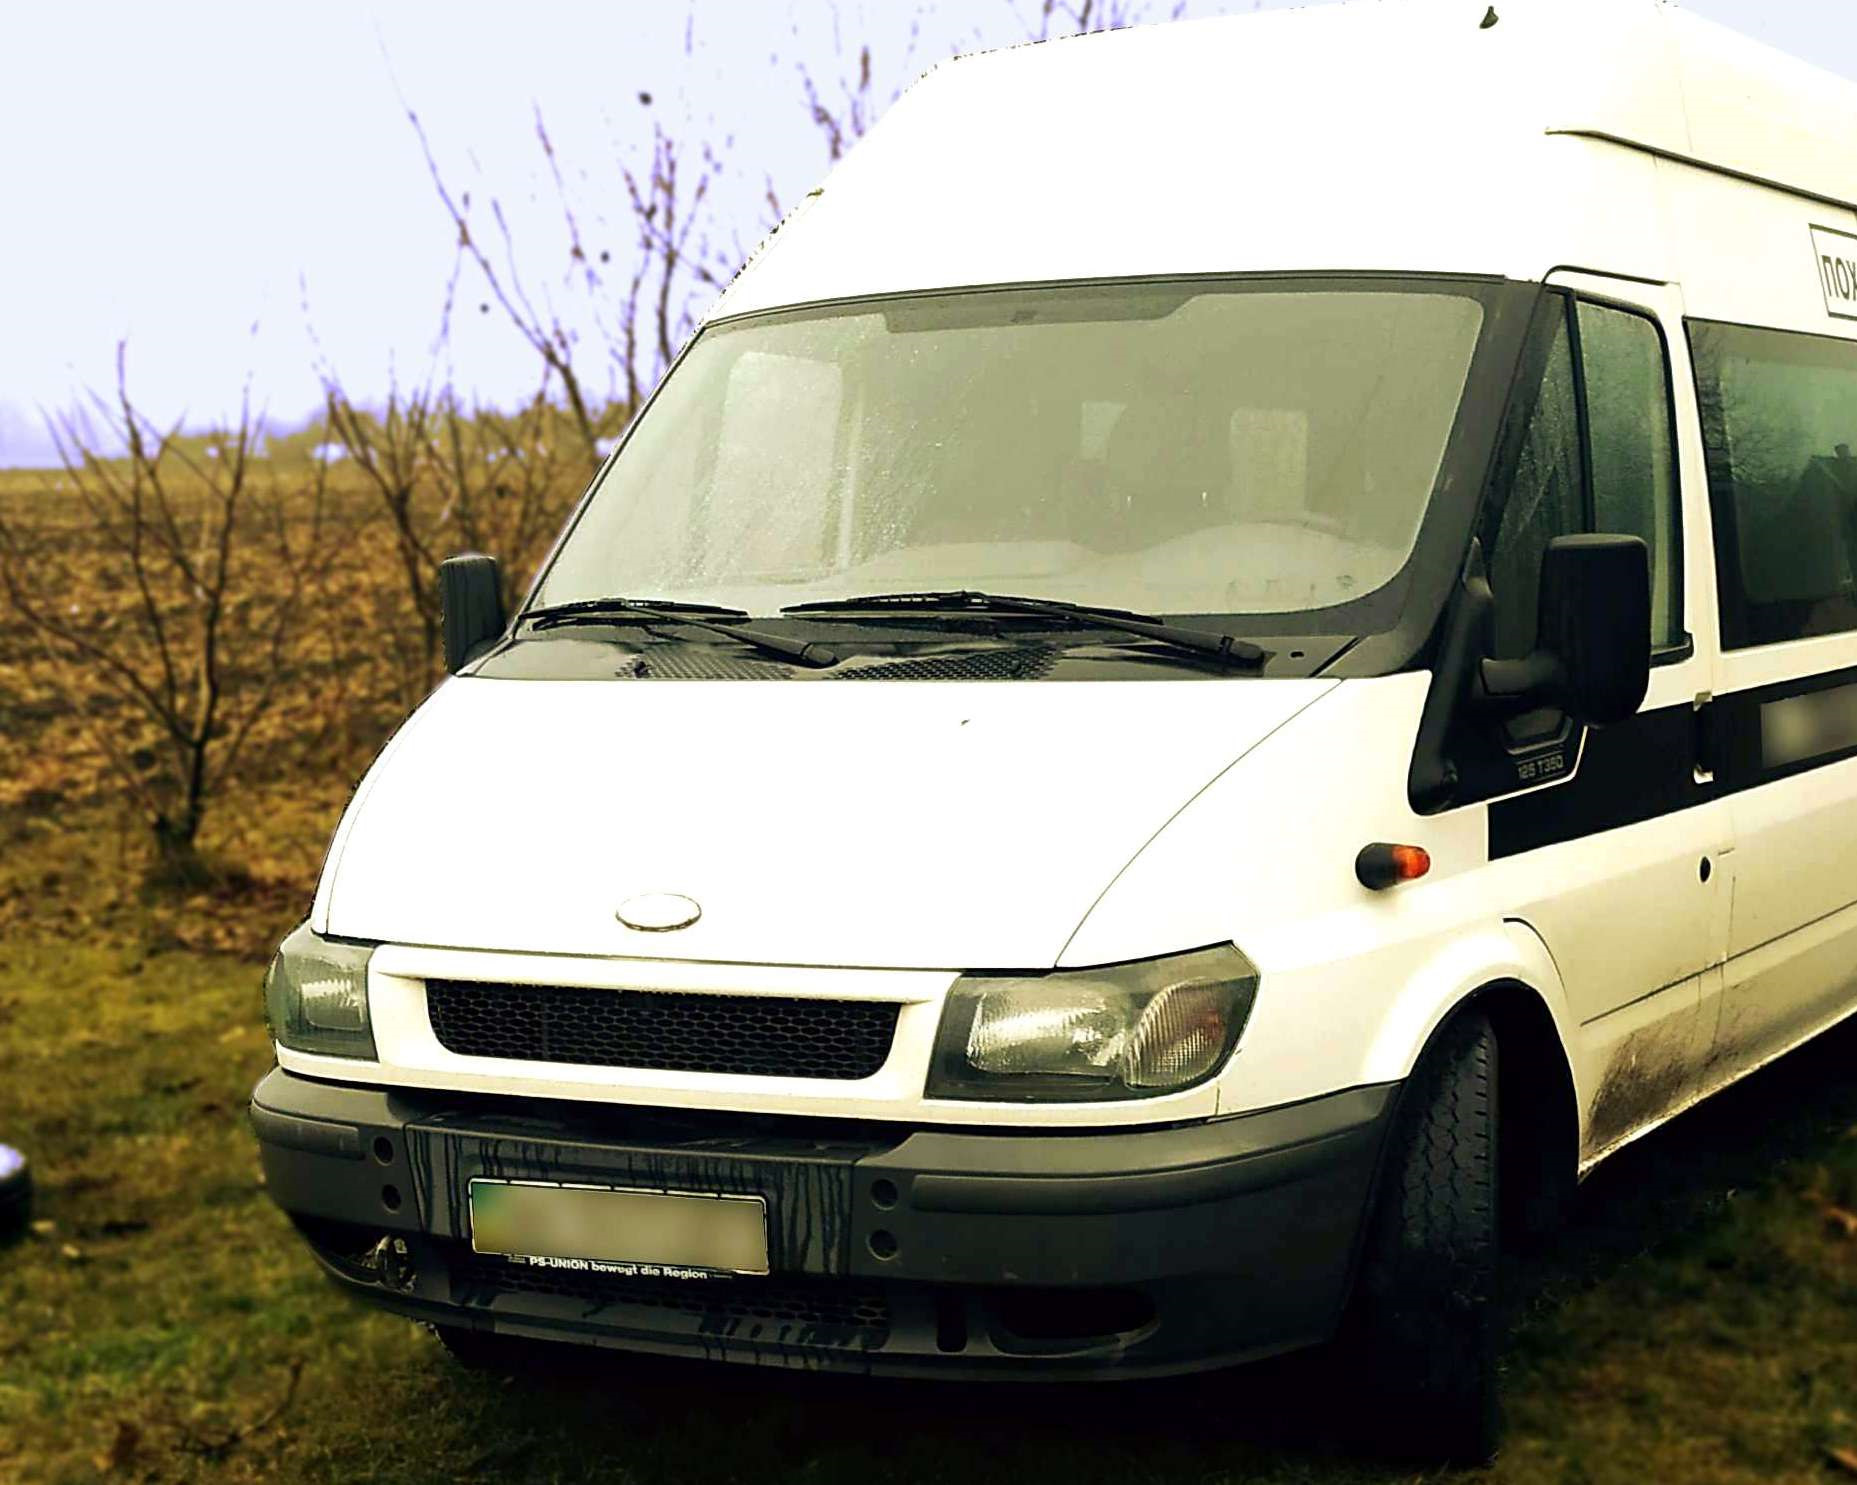 Форд транзит 2006 2014. Ford Transit 2000-2006. Ford Транзит 2000. Форд Transit 2000. Ford Transit 2006.